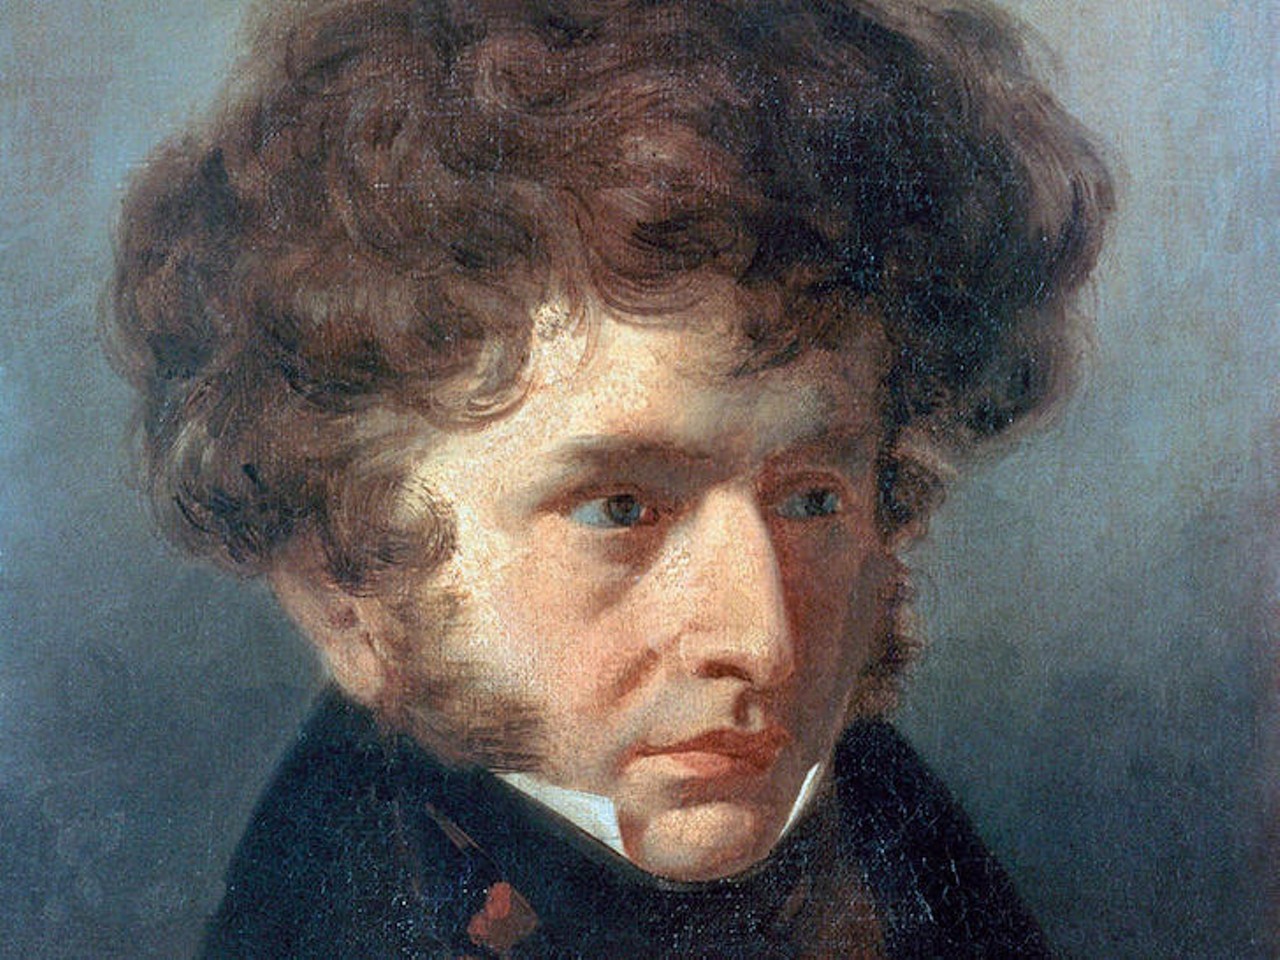 Sunday, Nov. 17Inside the Score: Symphonie Fantastique at Bob Carr TheaterPainting of Hector Berlioz by Emile Signol